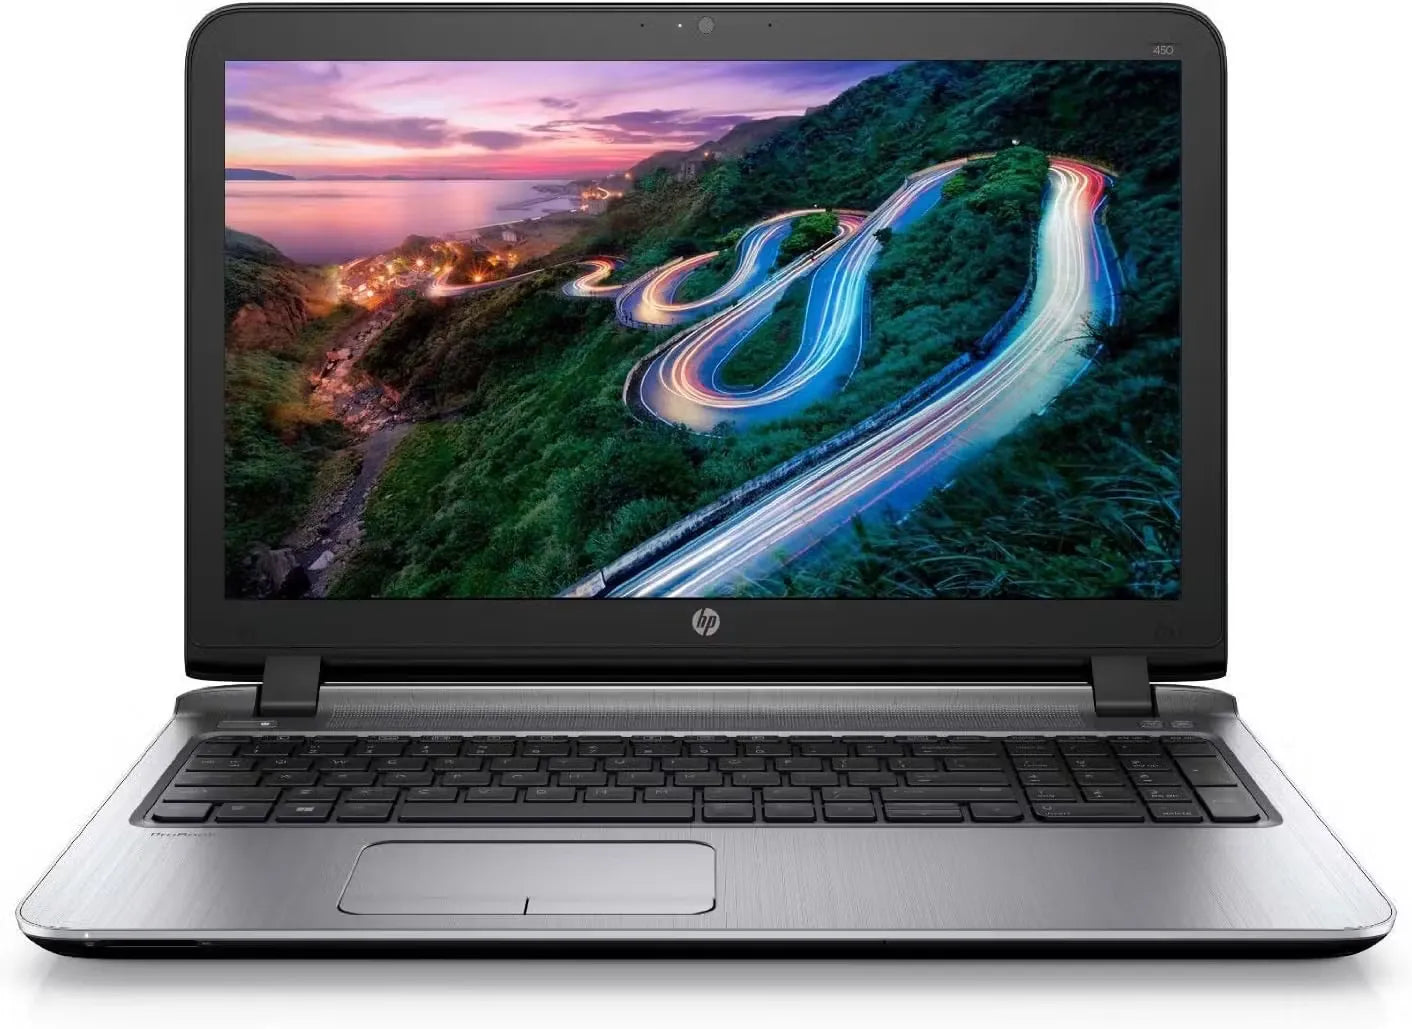 HP ProBook 450 G3: 15.6" thin & light laptop with Intel Core i3, 256GB SSD & 4GB RAM.  Business-ready ProBook 450 G3: Powerful performance for work & everyday tasks.  Stay productive on the go with the portable HP ProBook 450 G3 laptop. 15.6" Full HD display, Intel Core i3 processor, 256GB SSD storage, 4GB RAM.  Windows 10 Pro operating system included (mention if relevant).  Ports for connecting to various devices & accessories. Upgrade your workday: Experience the HP ProBook 450 G3 laptop.